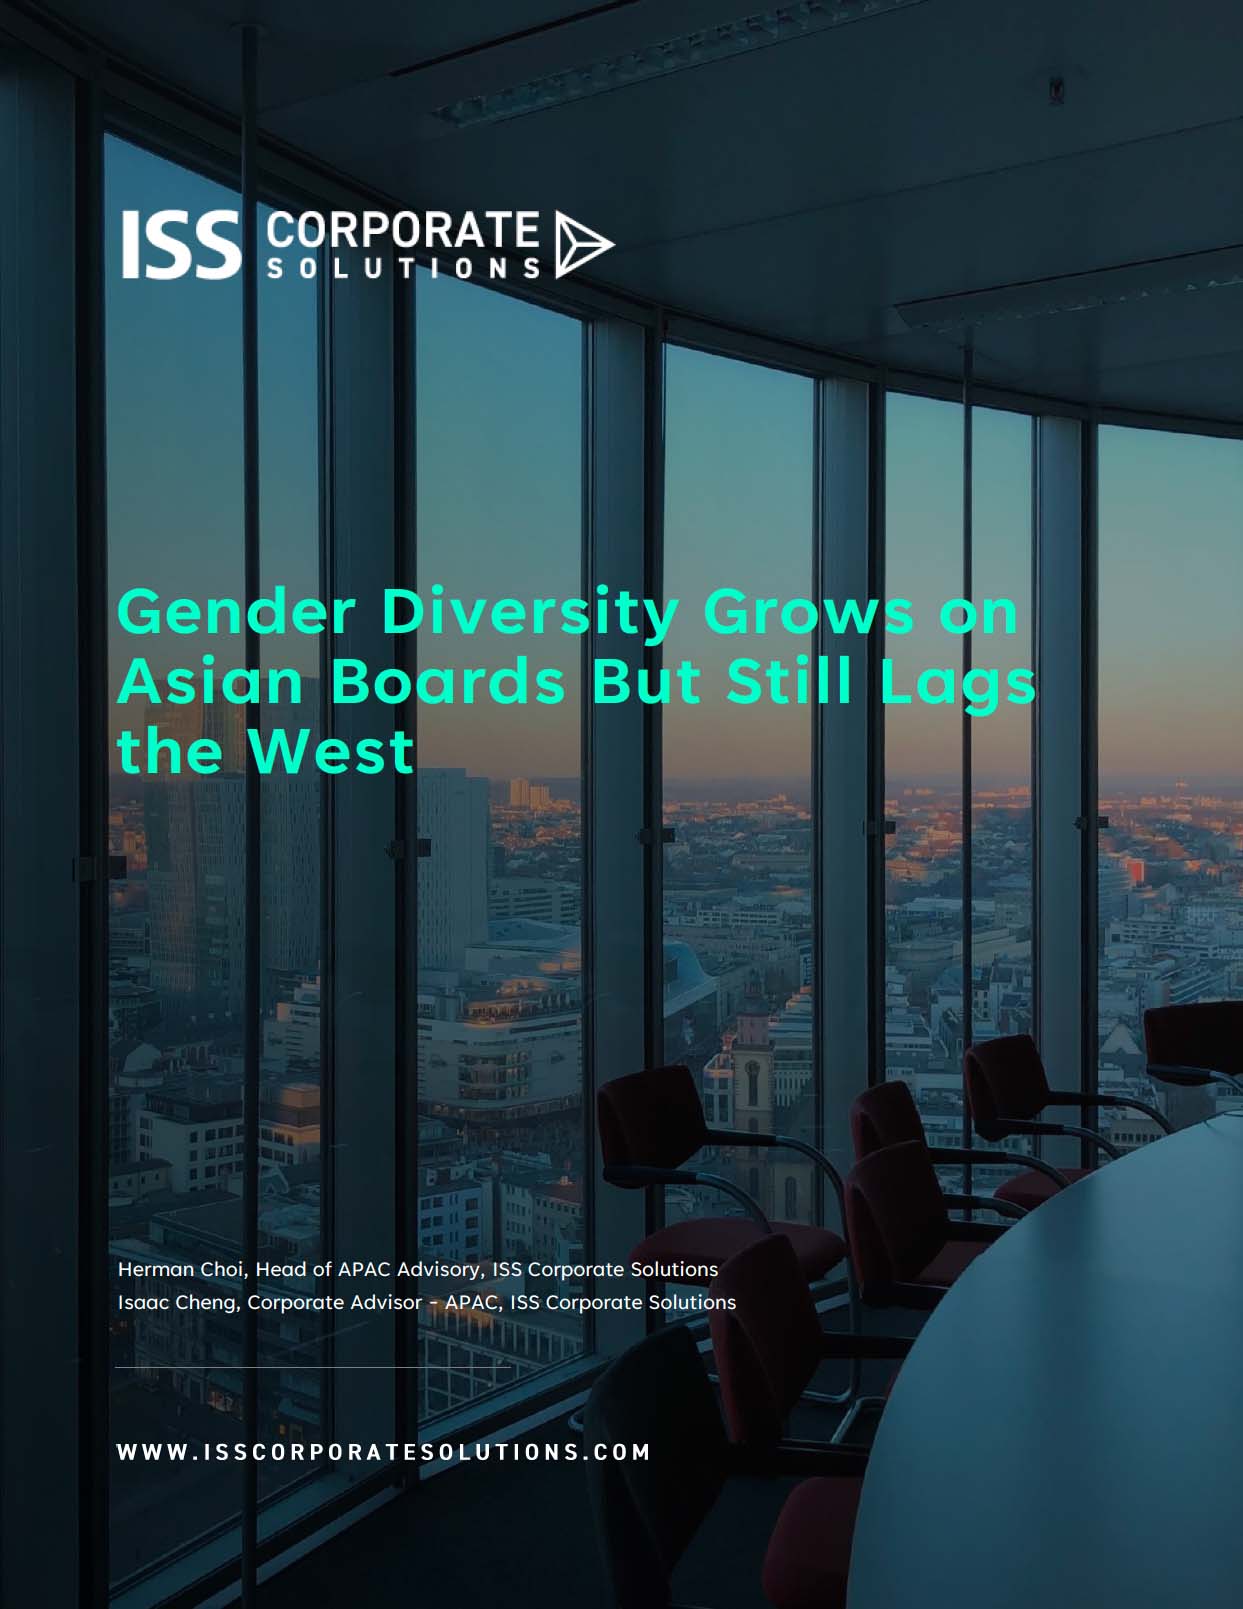 Gender Diversity Grows on Asian Boards But Still Lags the West